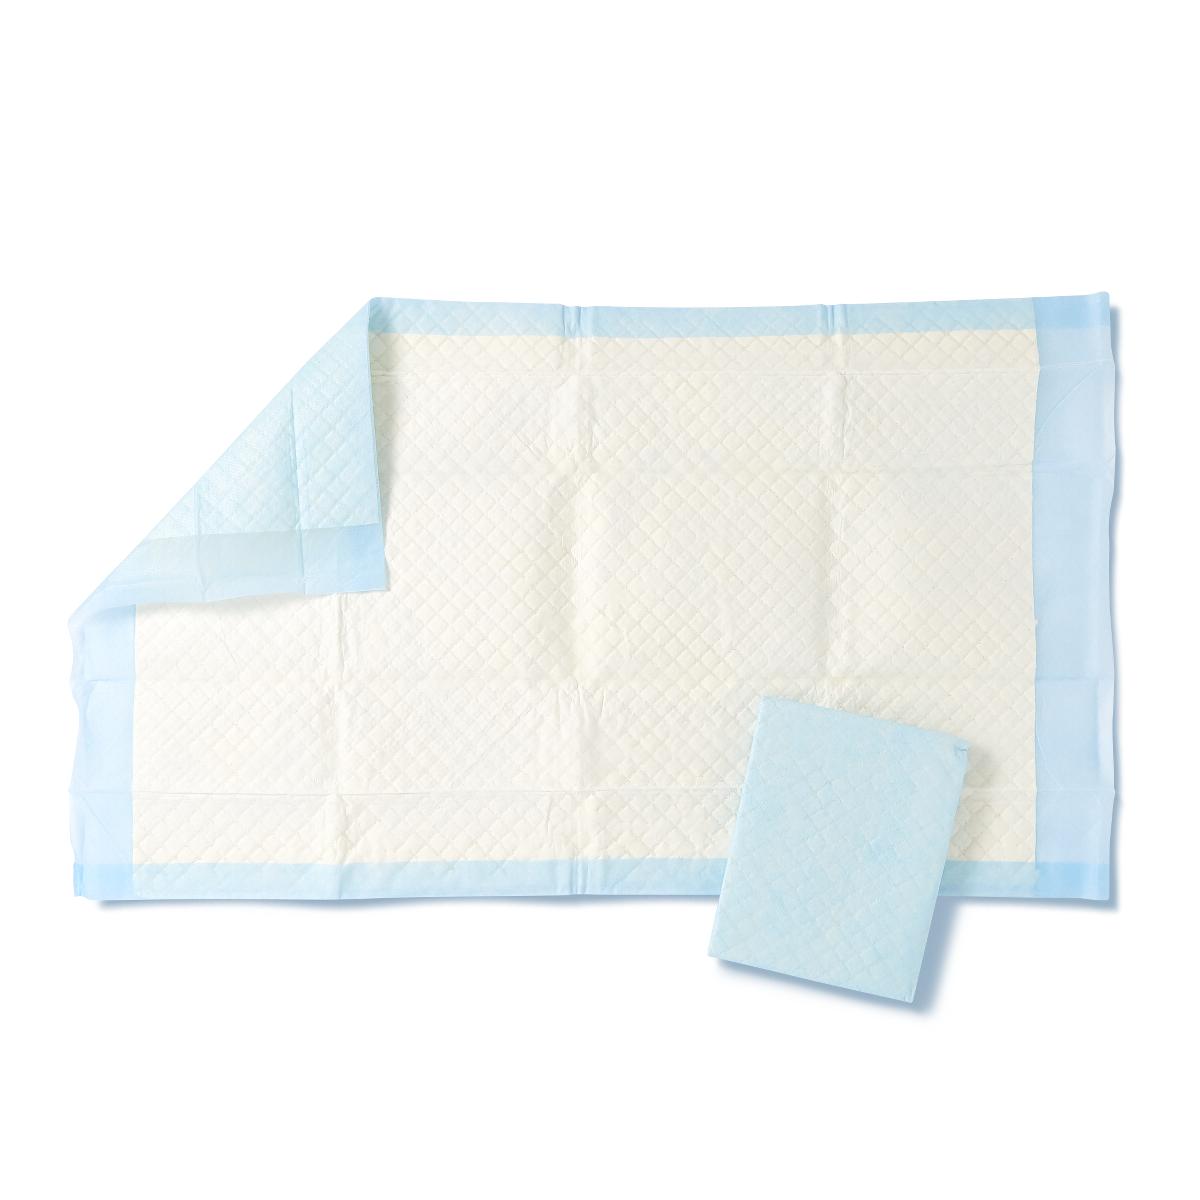 50 Each-Case / Blue / 23" X 36" Incontinence - MEDLINE - Wasatch Medical Supply